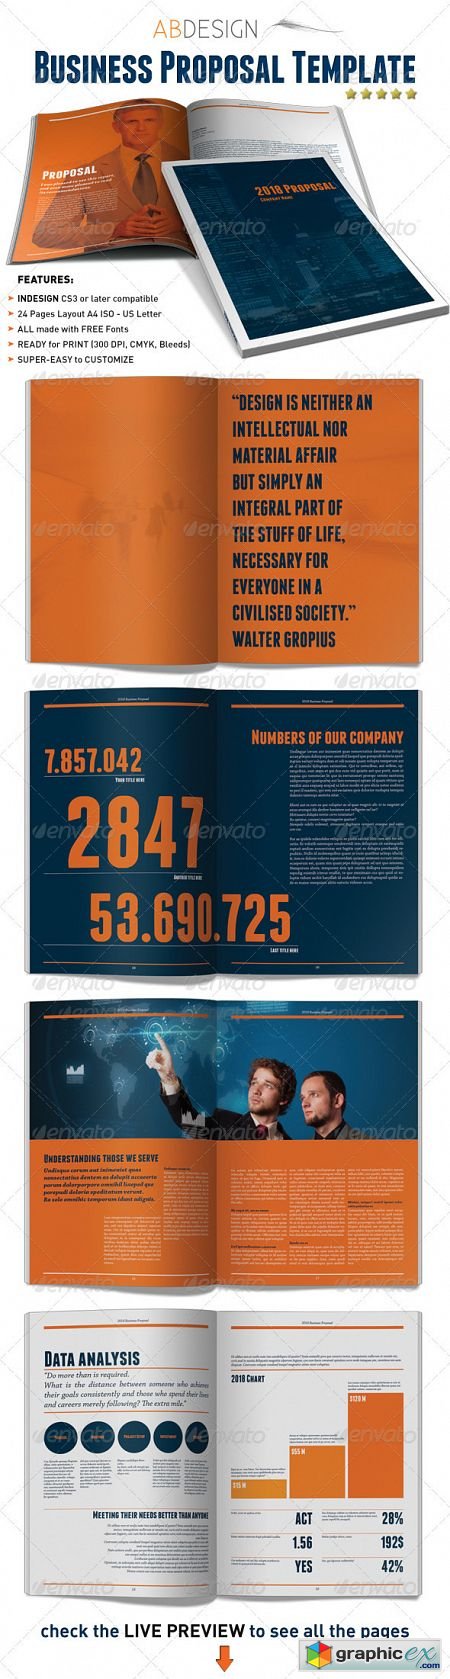 Business Proposal Indesign Template